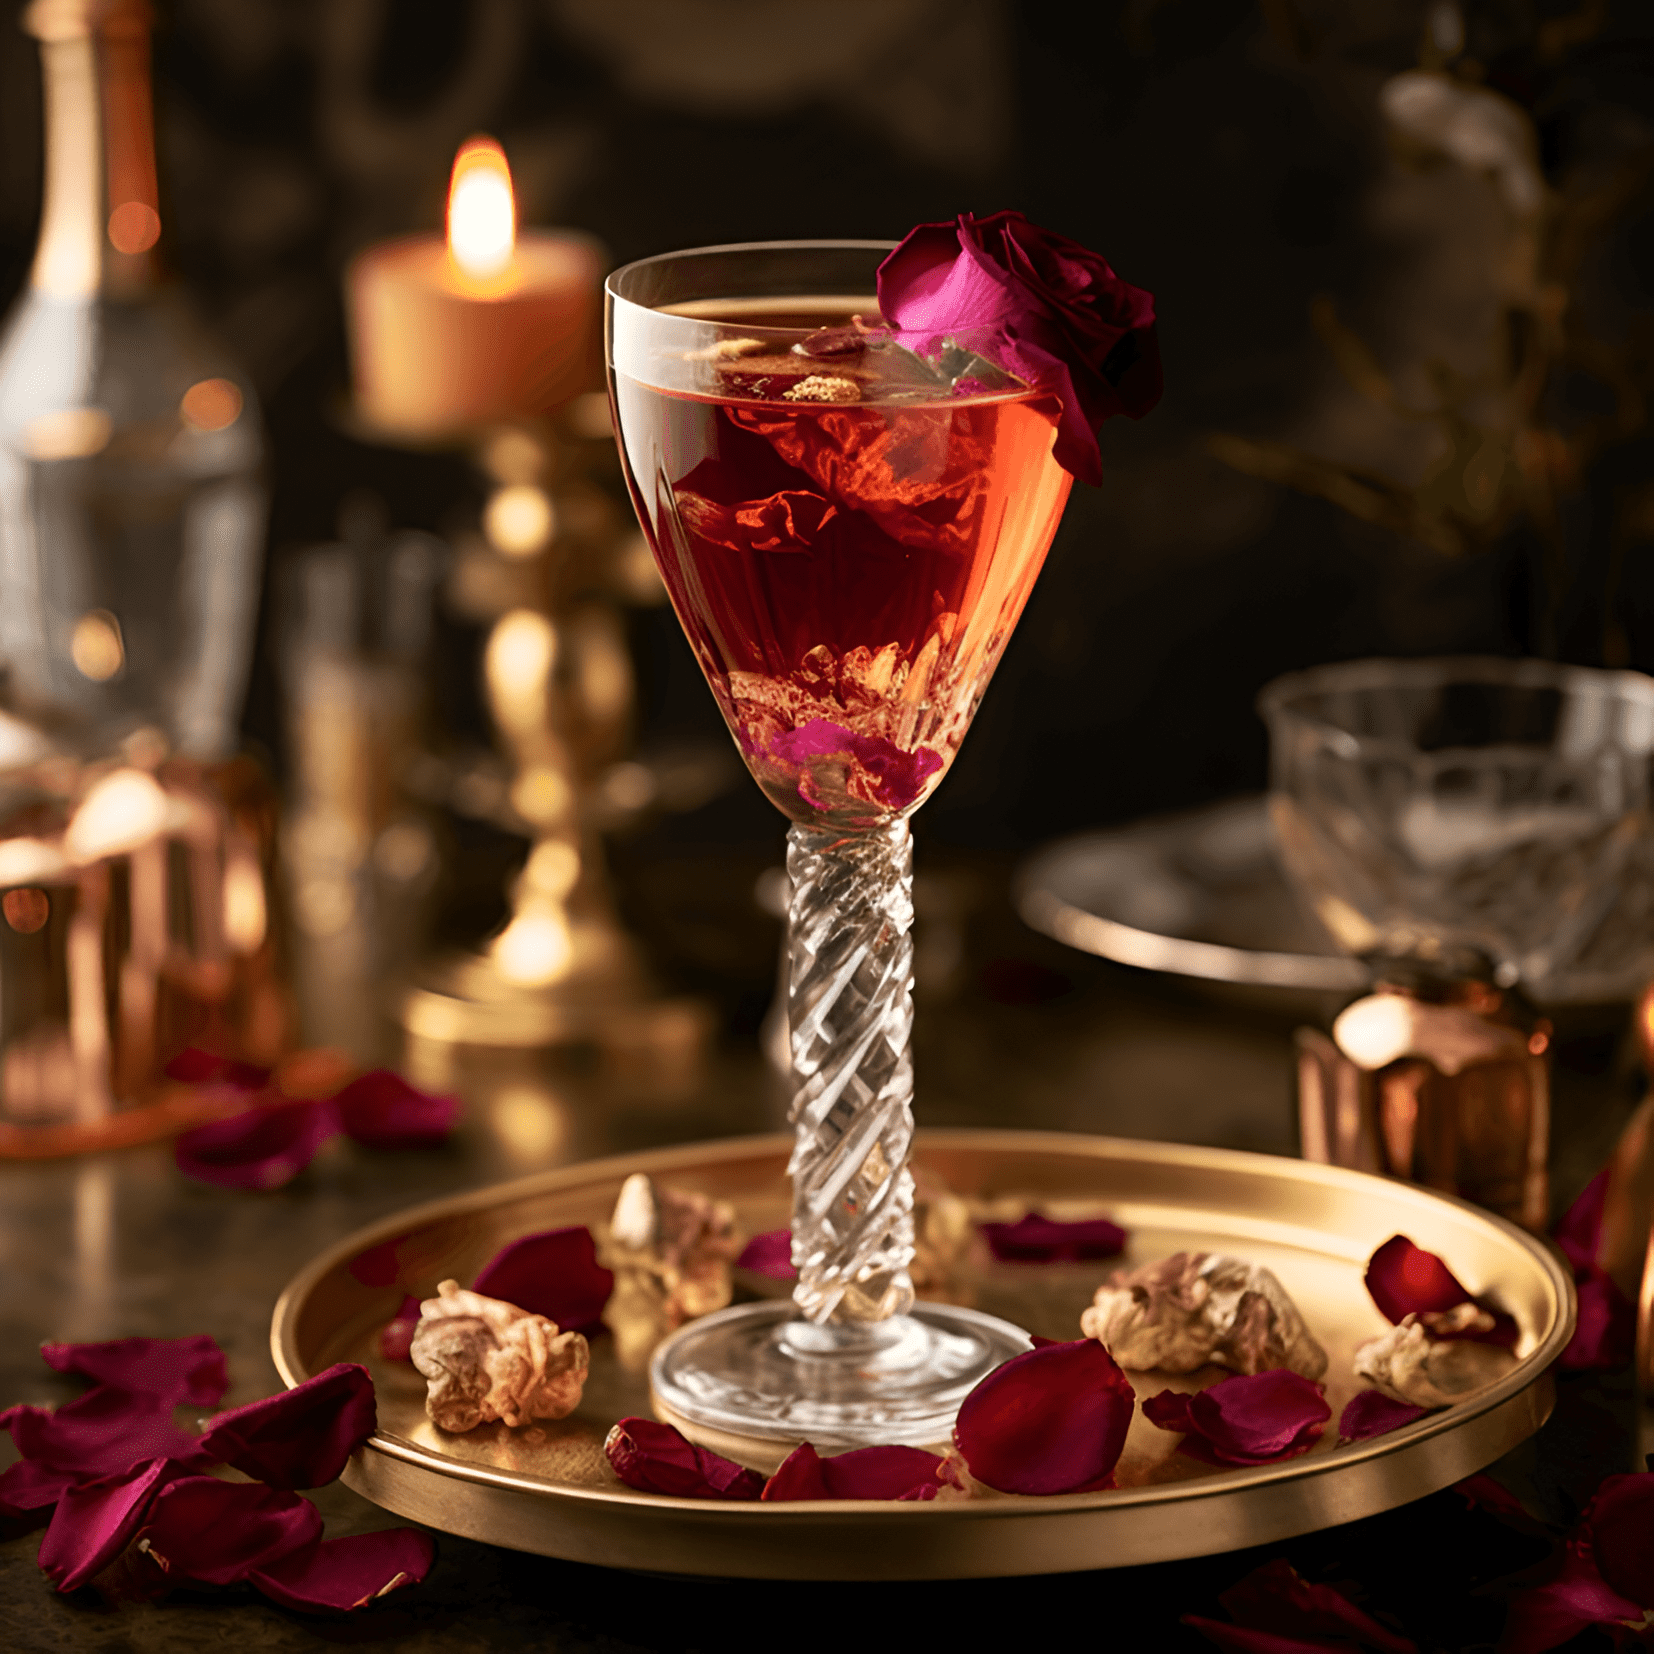 Royal Romance Cocktail Recipe - The Royal Romance cocktail offers a harmonious balance of sweet, sour, and fruity flavors. The rich, velvety texture is complemented by a subtle hint of floral notes, making it a truly delightful and refreshing drink. The cocktail is neither too strong nor too light, making it an ideal choice for those who appreciate a well-rounded and sophisticated taste.